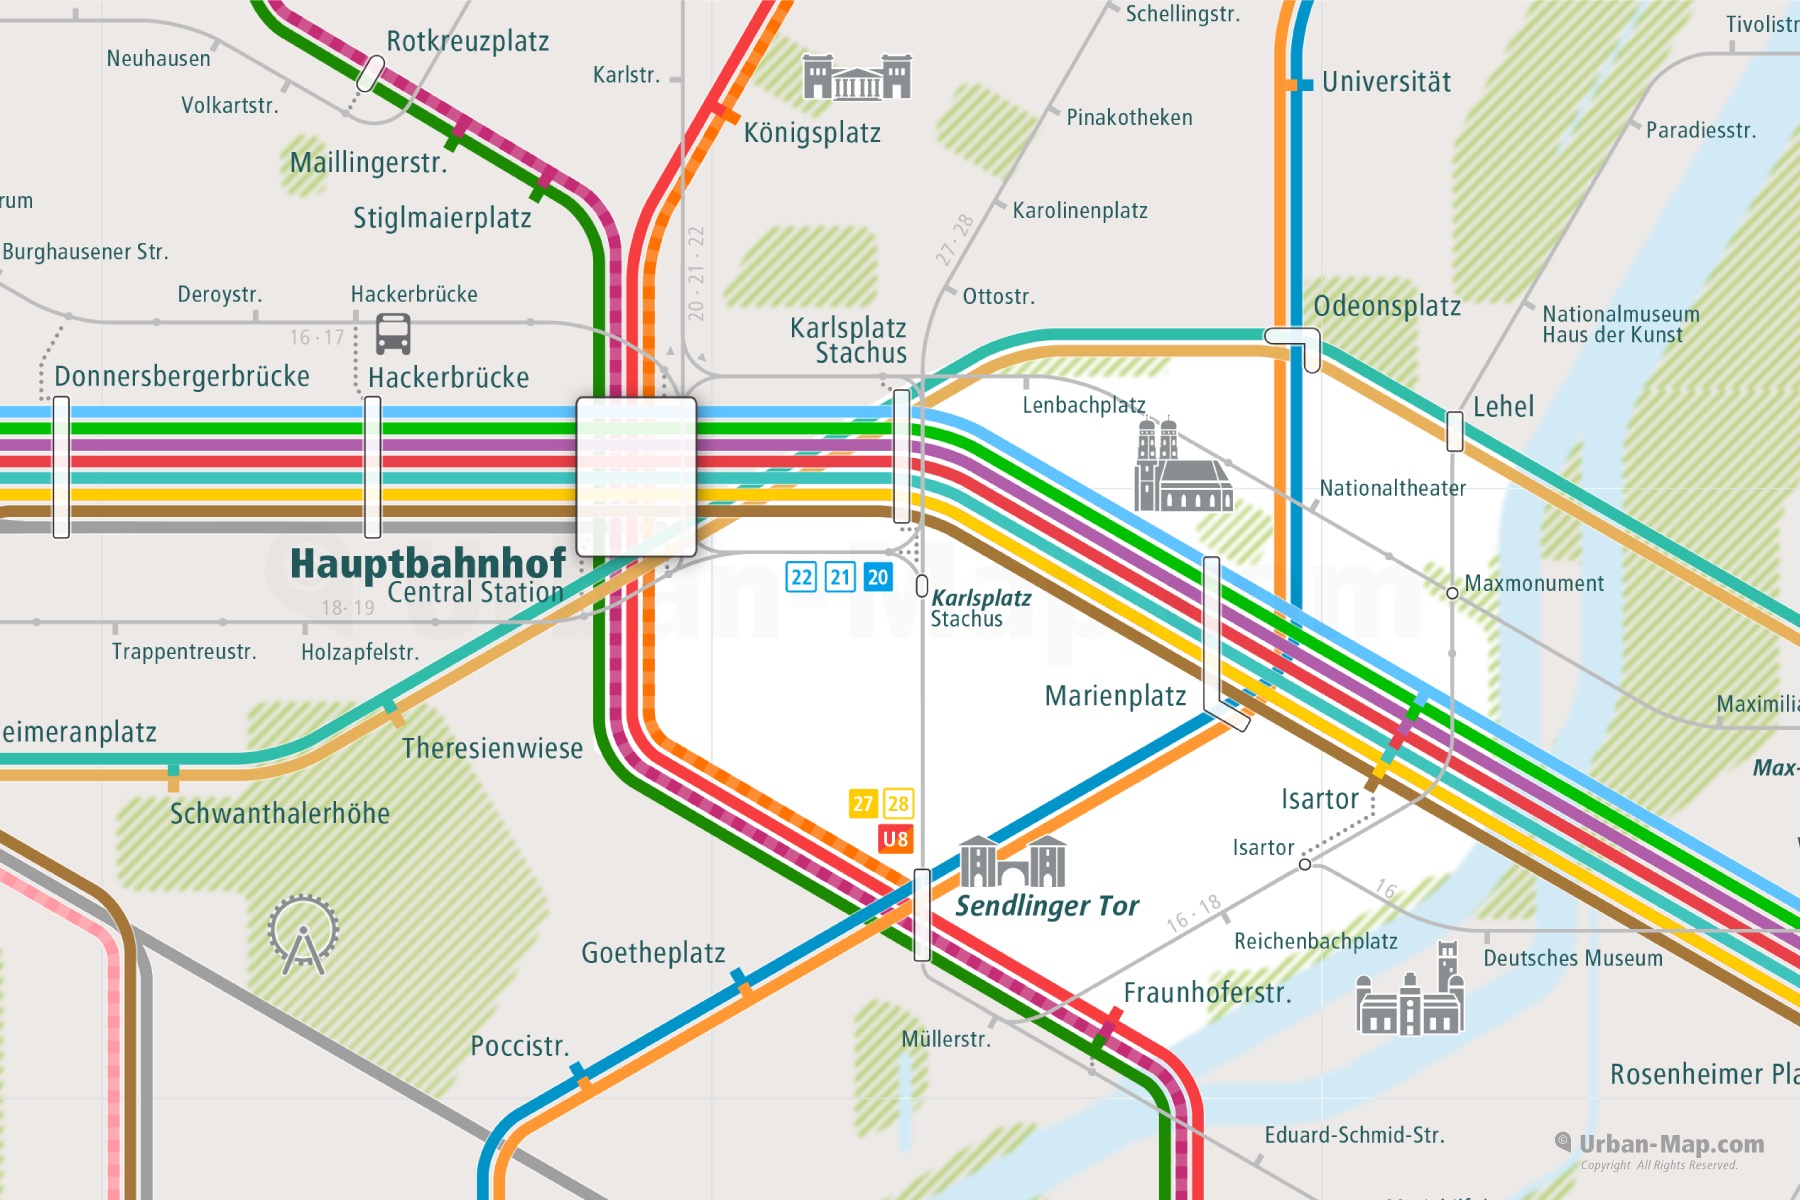 Munich City Rail Map shows the train and public transportation routes of - Close-Up